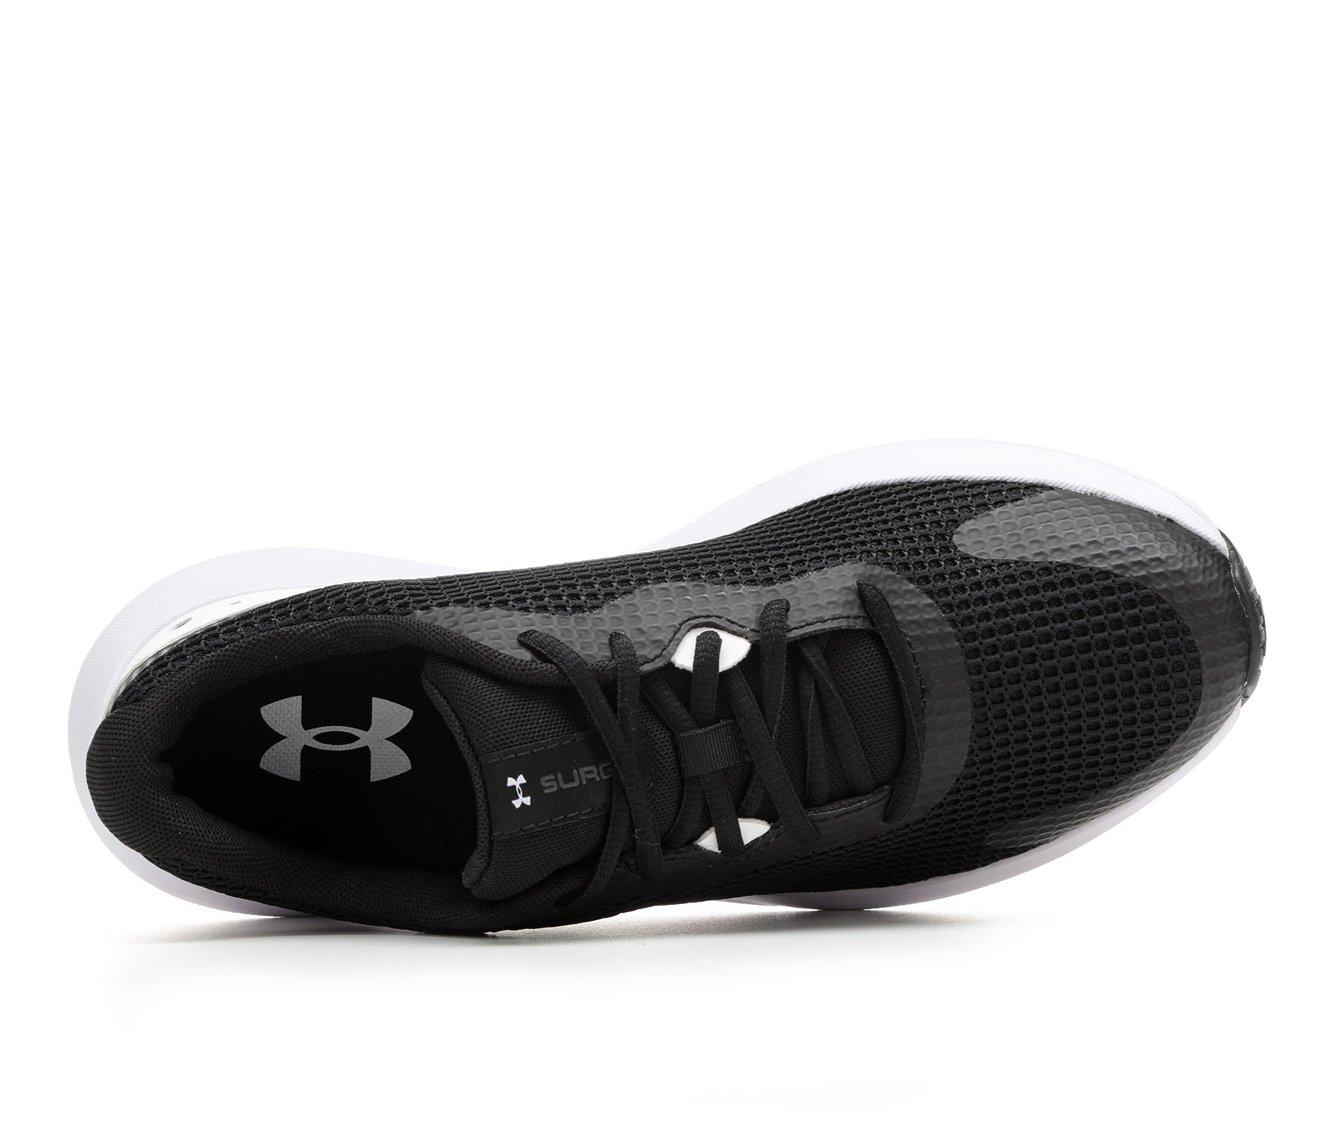 Men's Under Armour Surge 3 Running Shoes Shoe Carnival